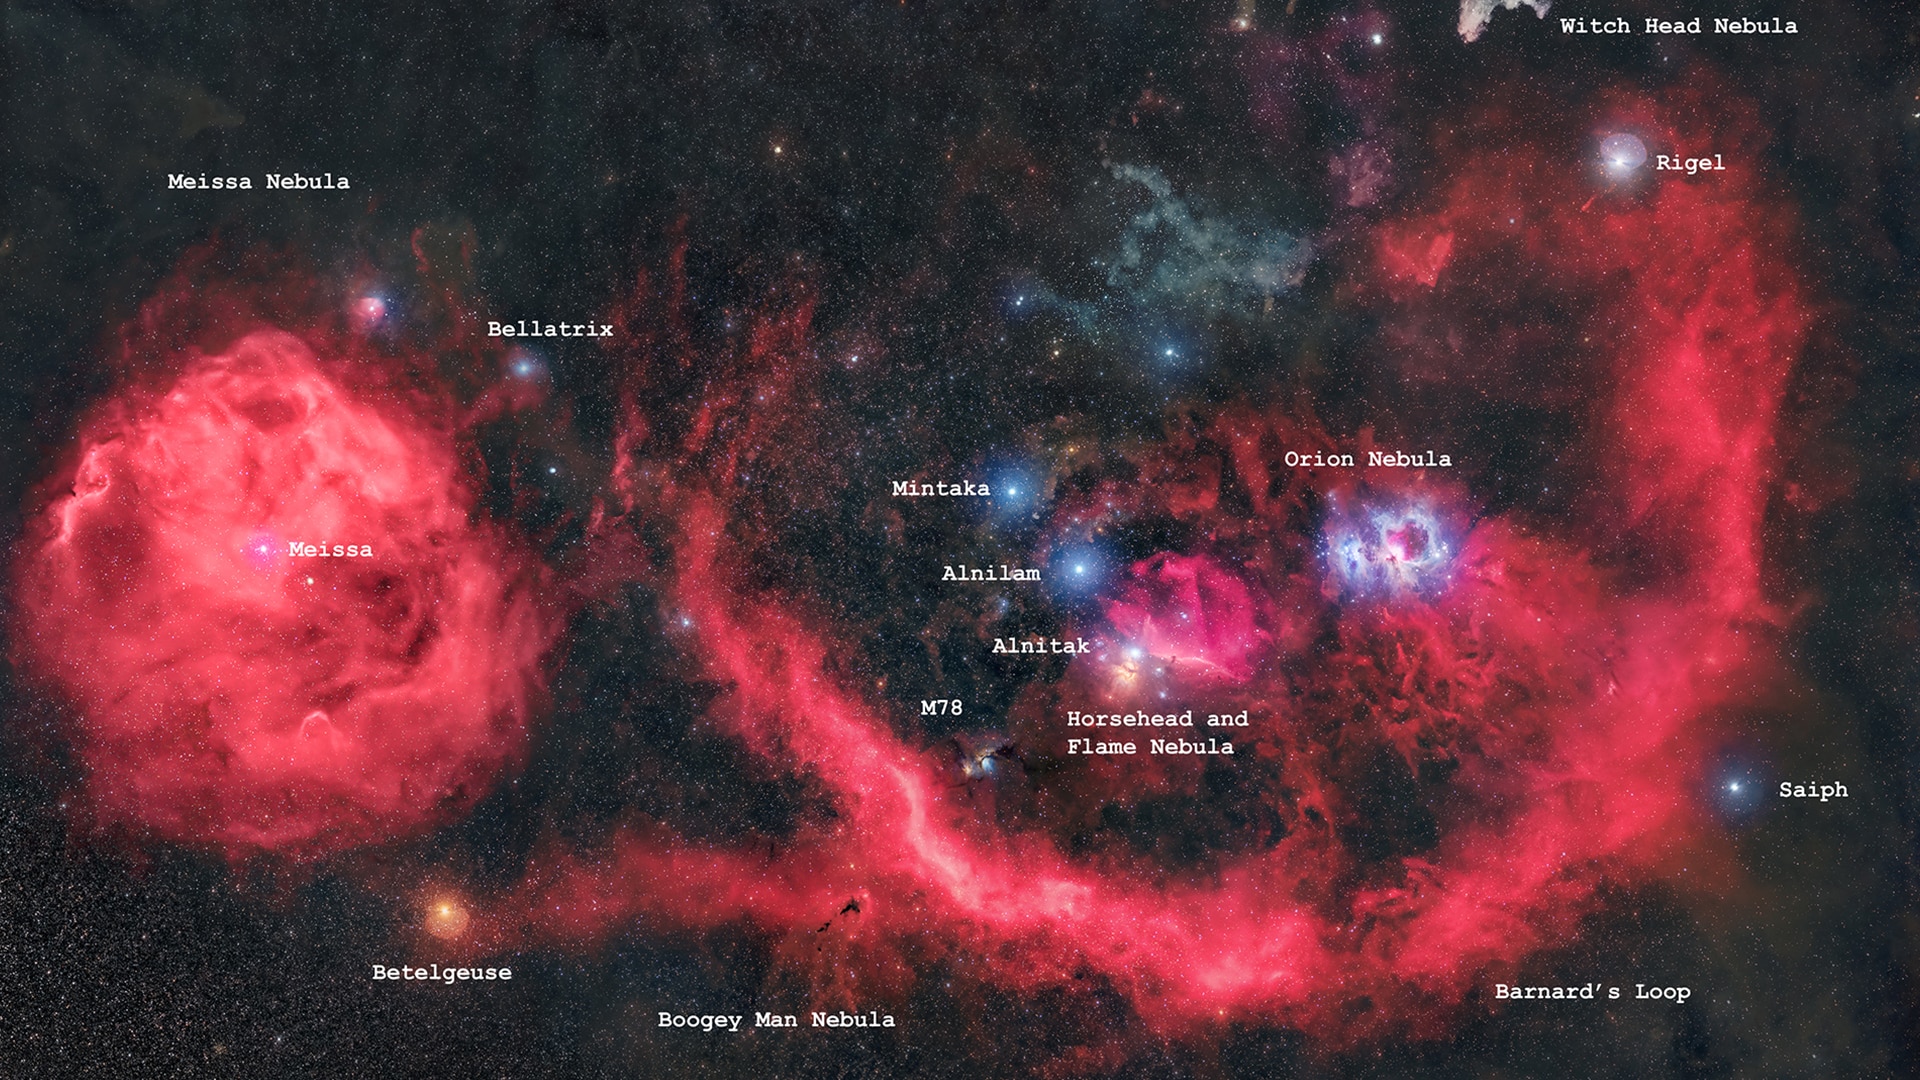 The orion constellation, labelled